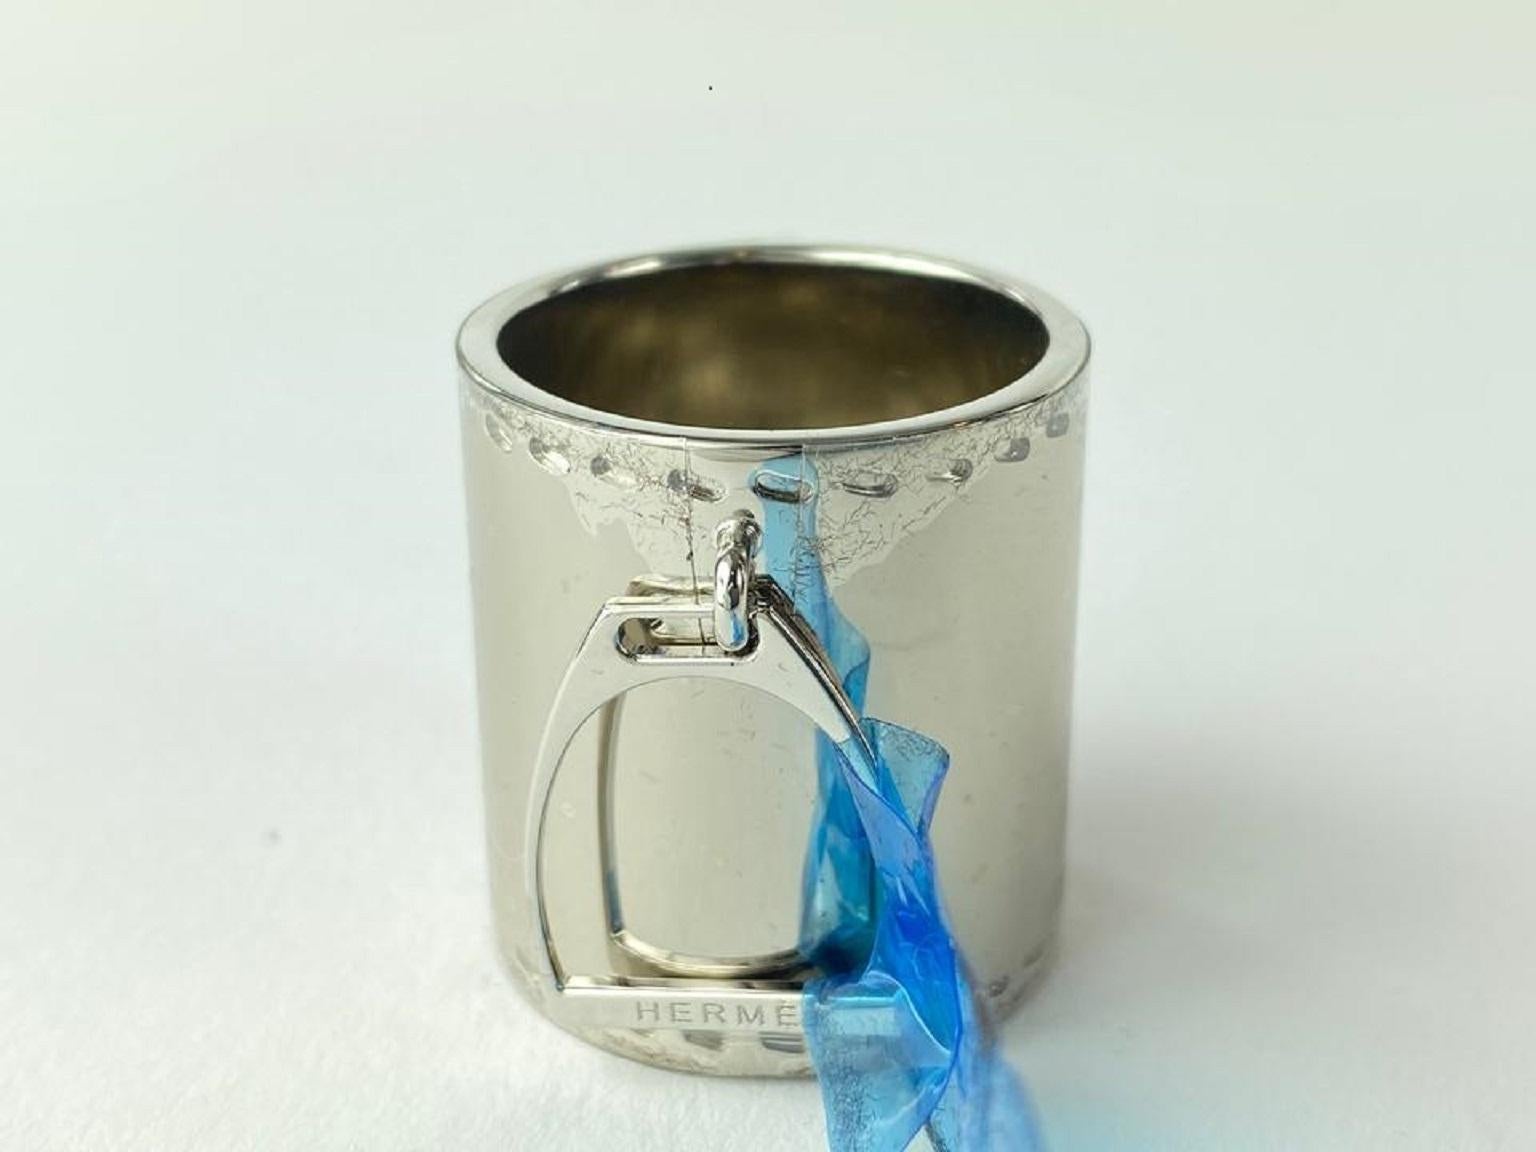 hermes silver scarf ring